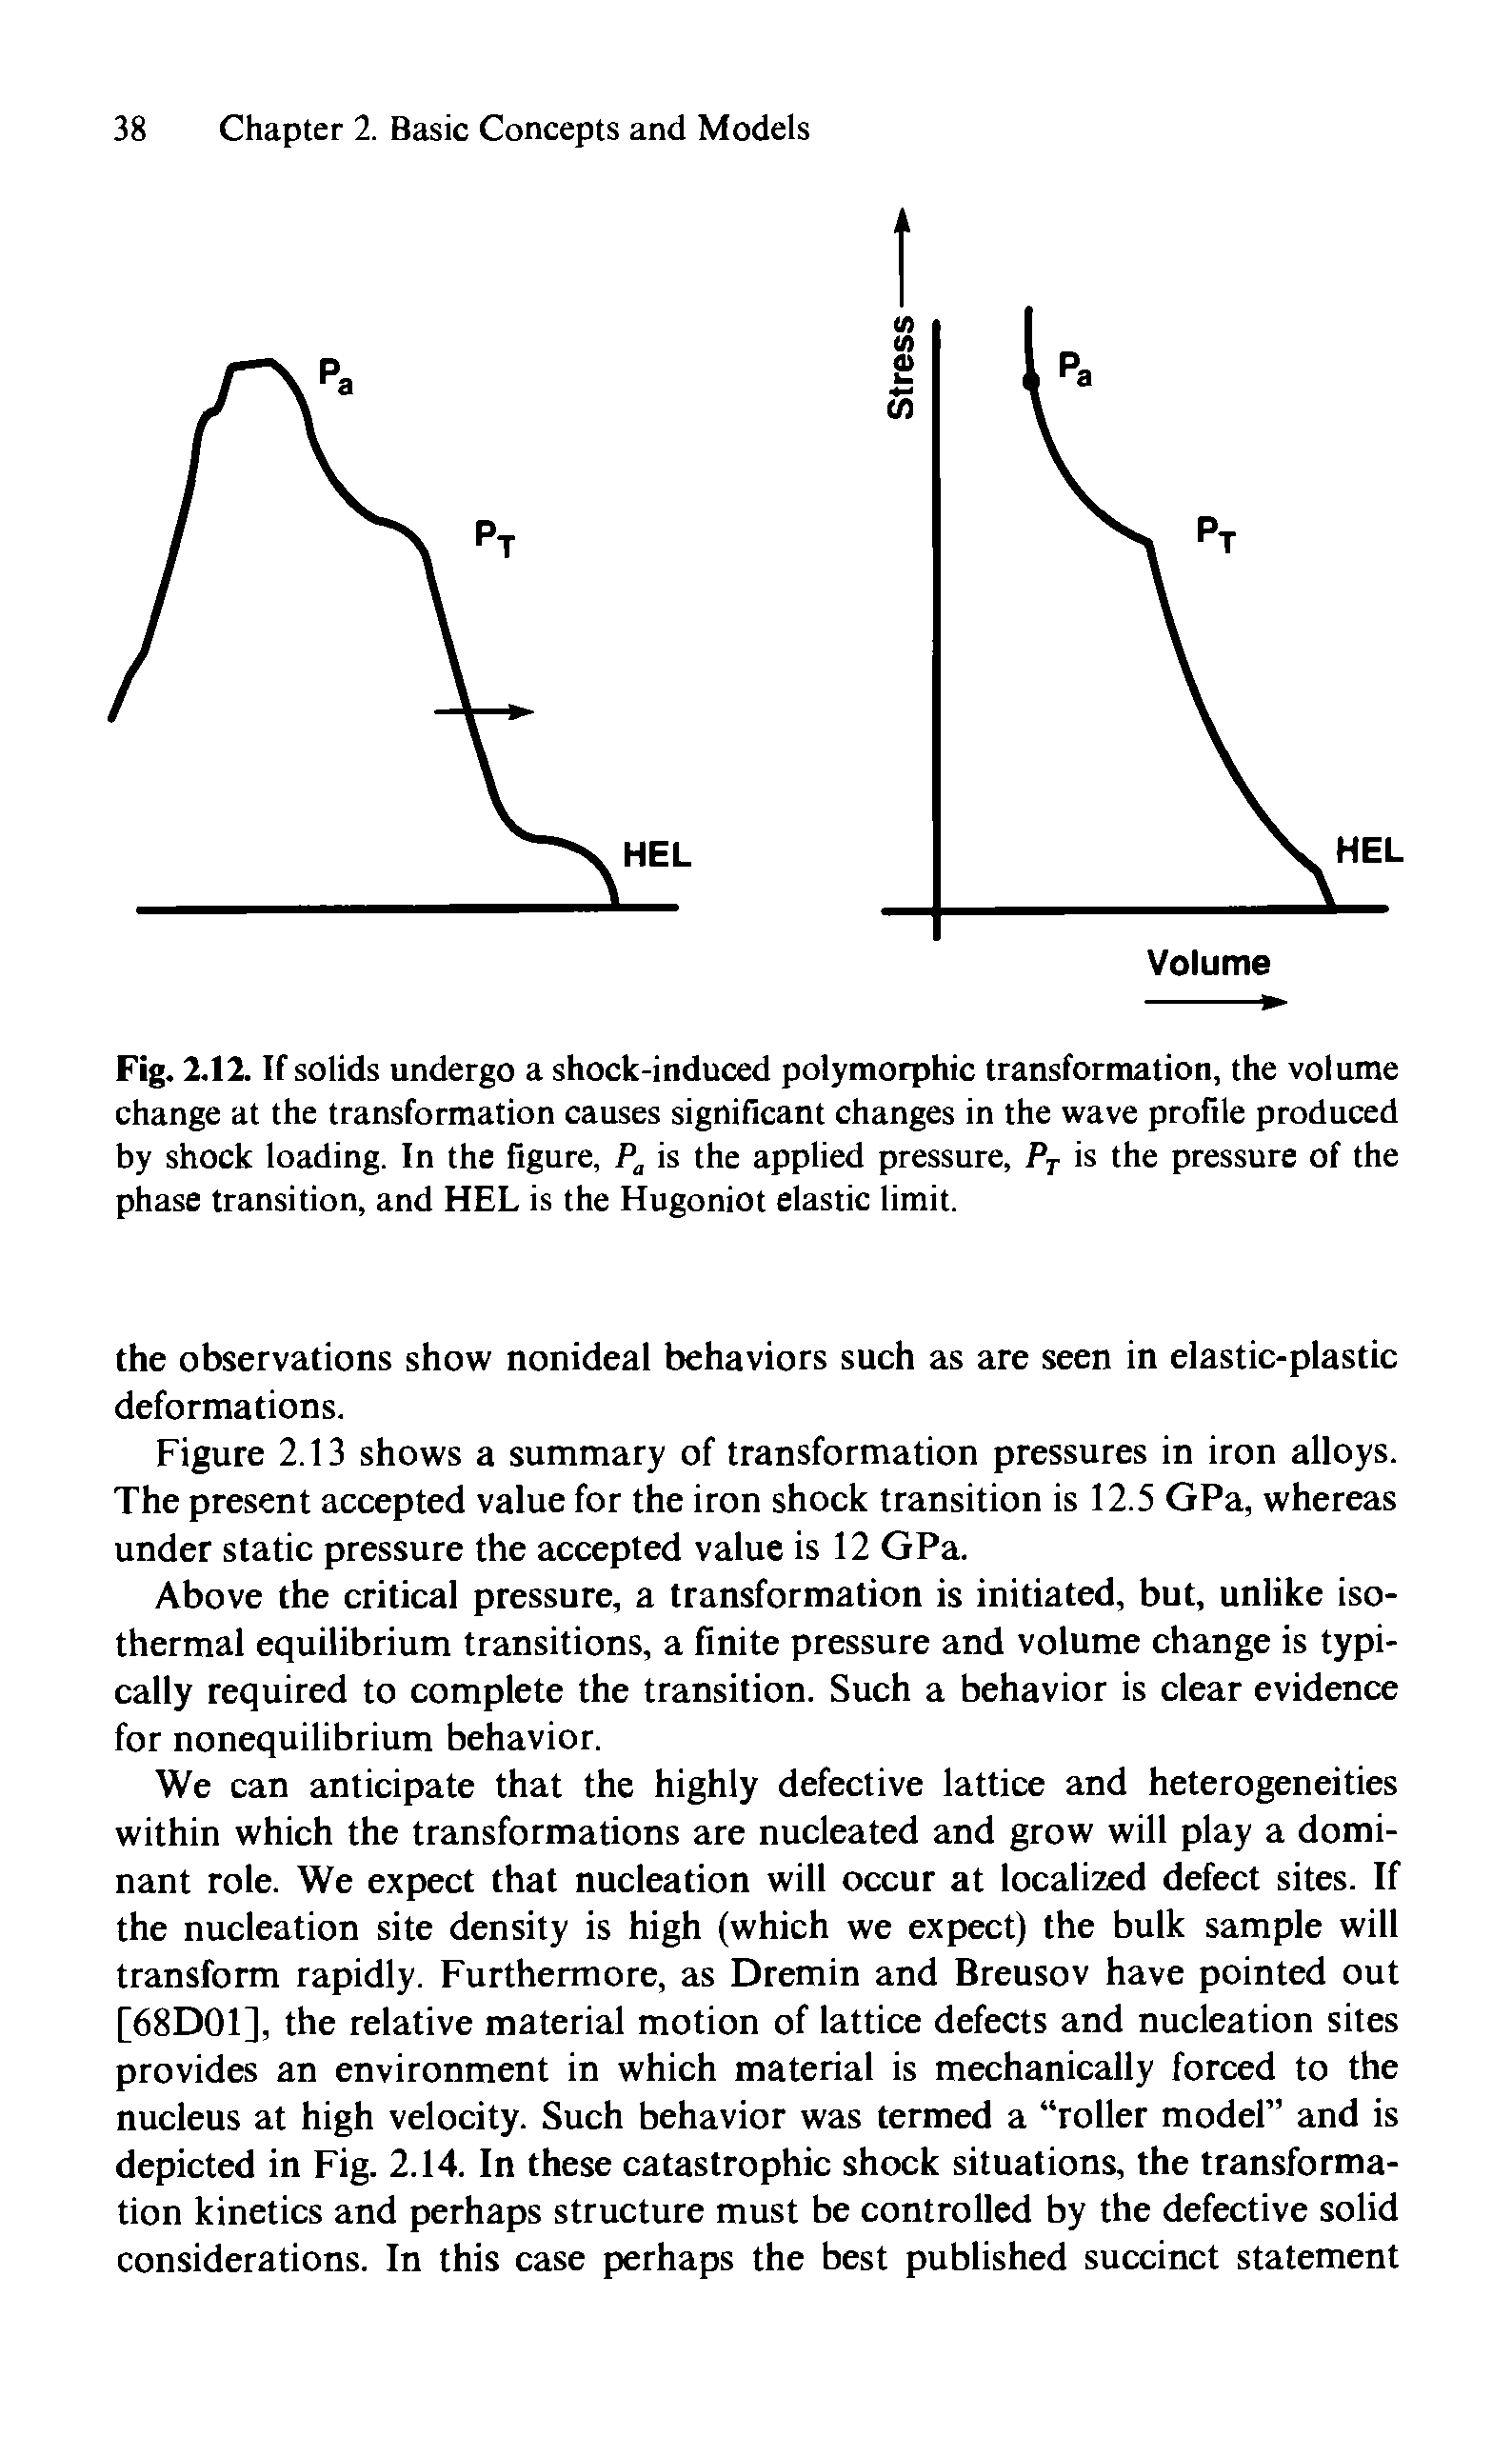 Fig. 2.12. If solids undergo a shock-induced polymorphic transformation, the volume change at the transformation causes significant changes in the wave profile produced by shock loading. In the figure, is the applied pressure, Pj is the pressure of the phase transition, and HEL is the Hugoniot elastic limit.